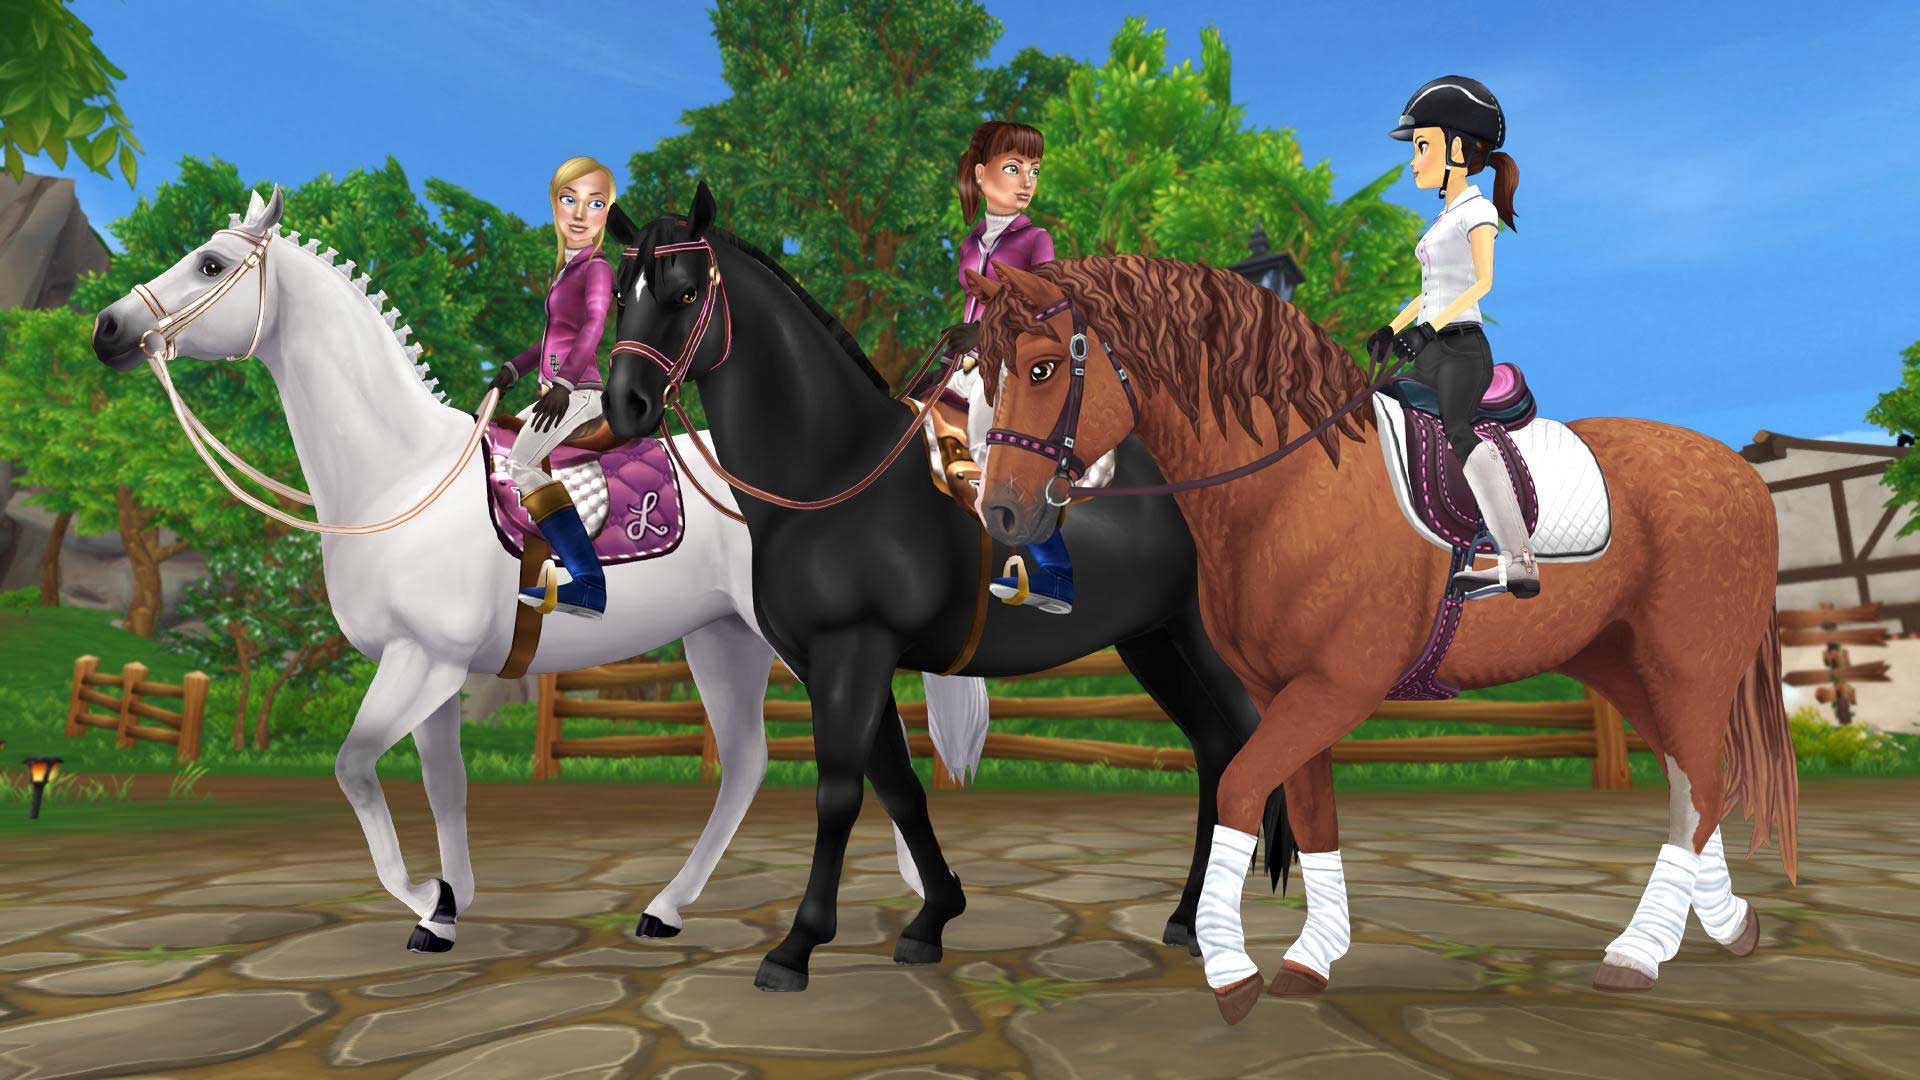 star stable codes 2021 june